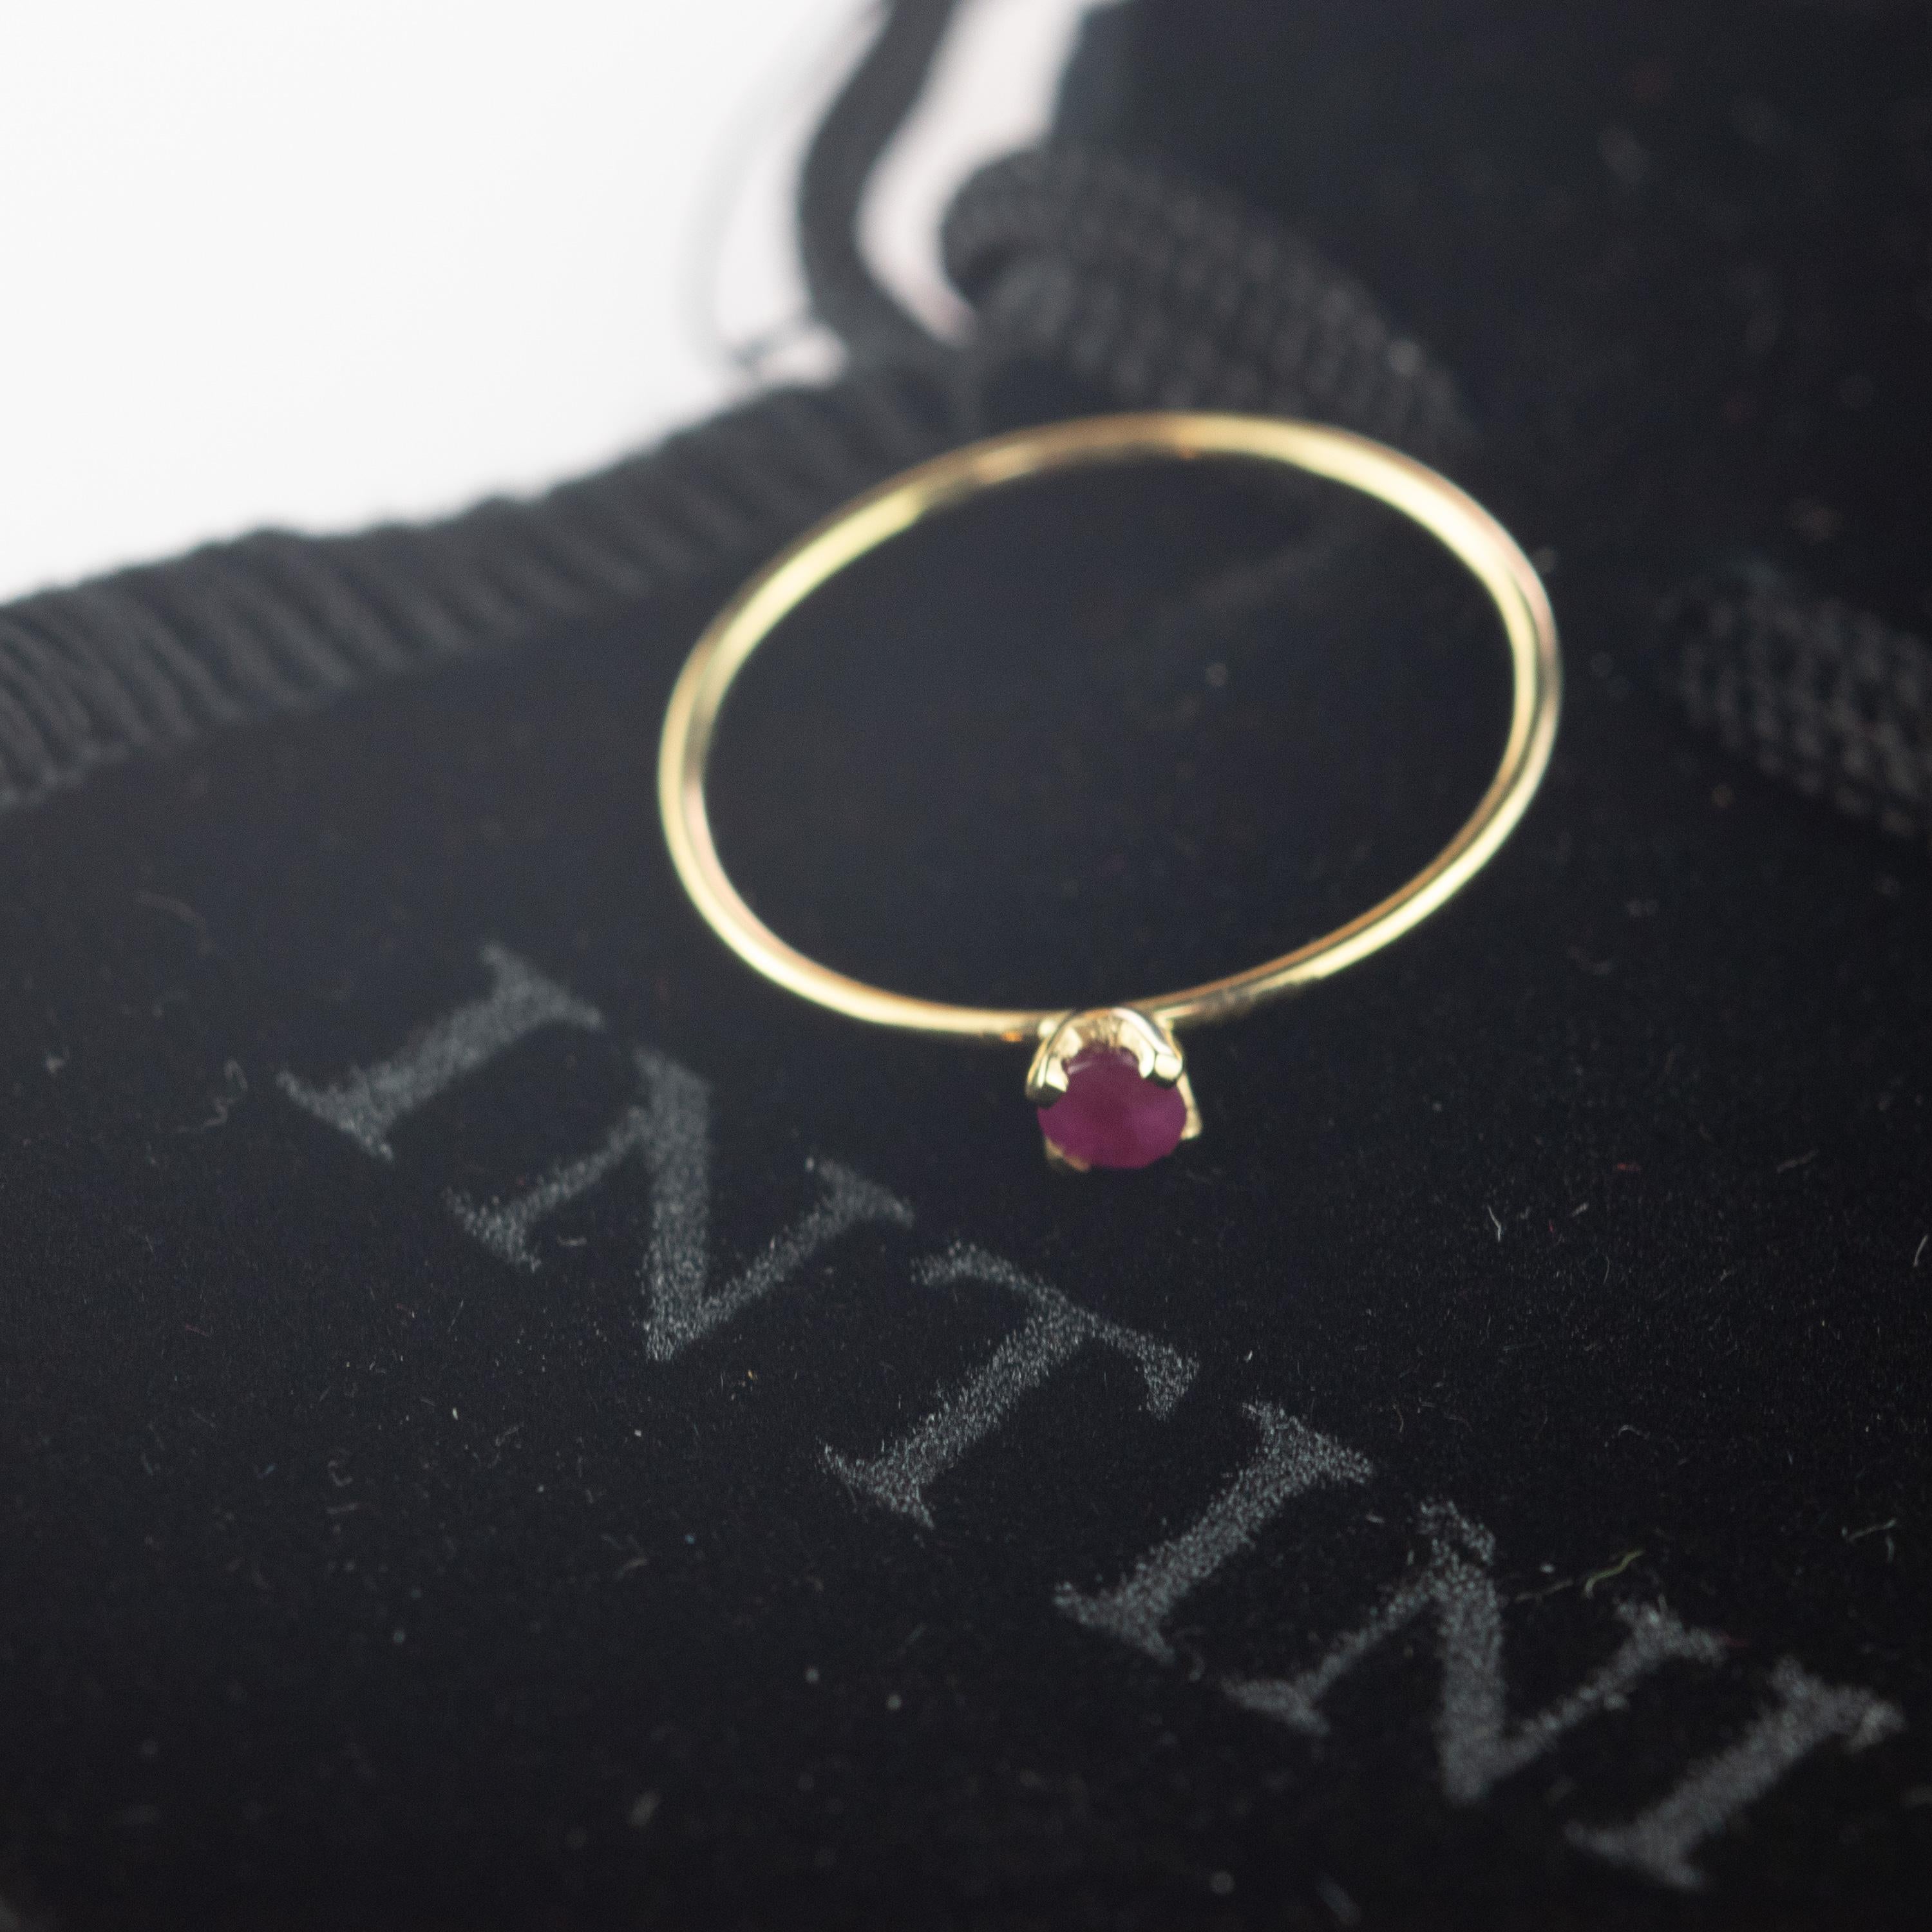 Stunning and magnificent ruby ring with 18 karat yellow gold. This epic jewellery piece is an outstanding display of quality and Italian handmade royal craftsmanship. Create a fashionable look full of light and desire. This handmade ring will